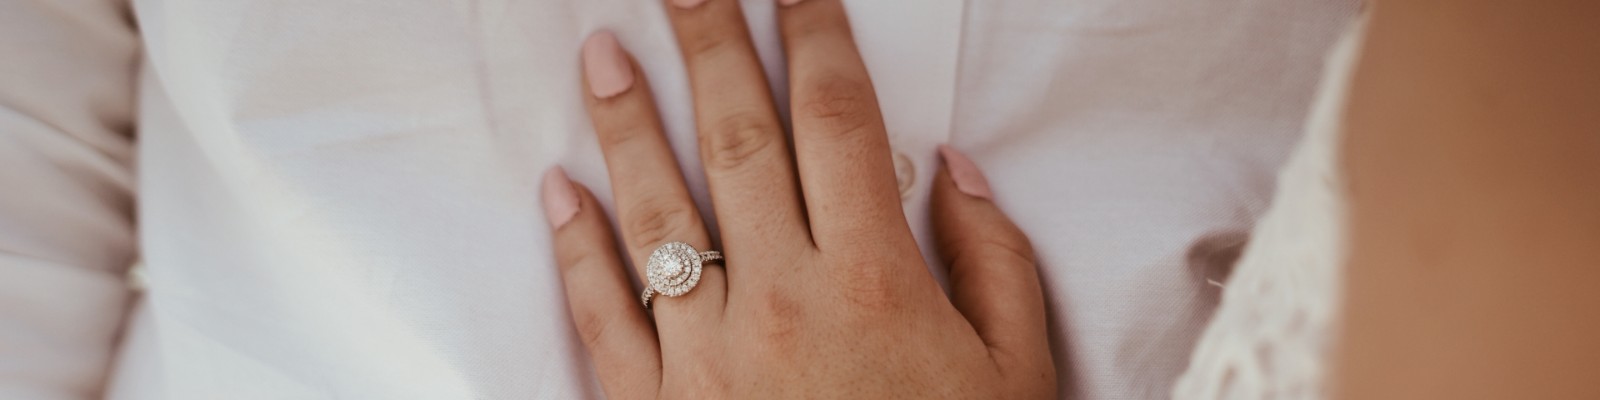 Engagement Ring Styles at Damiani Jewellers